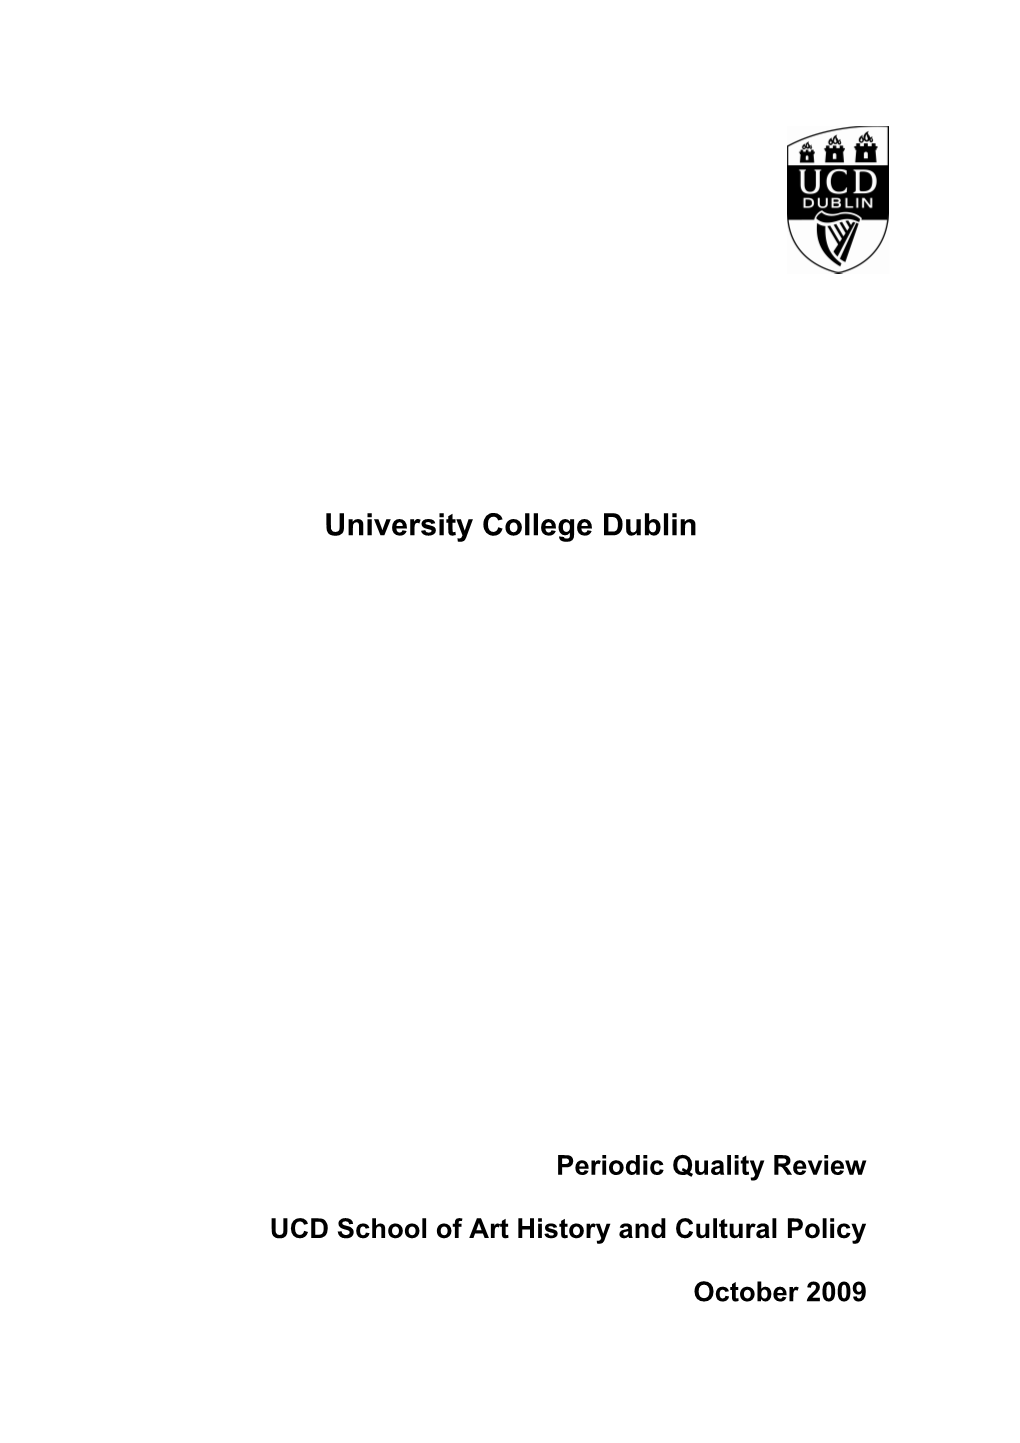 UCD School of Art History and Cultural Policy